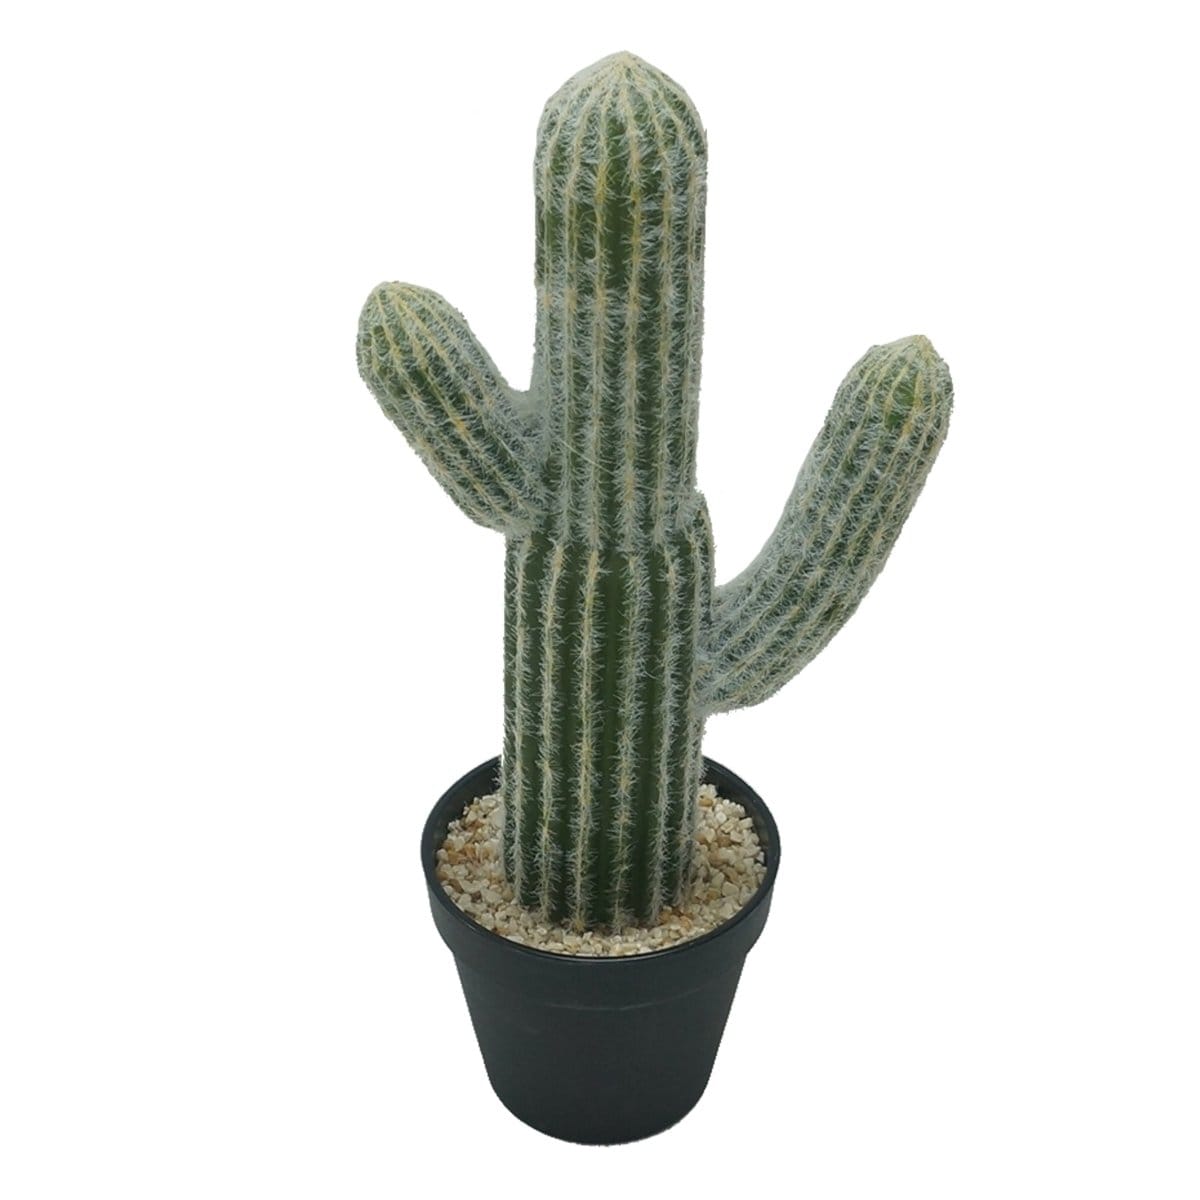 AB-F29564 Potted Faux Saguaro Cactus picket and rail